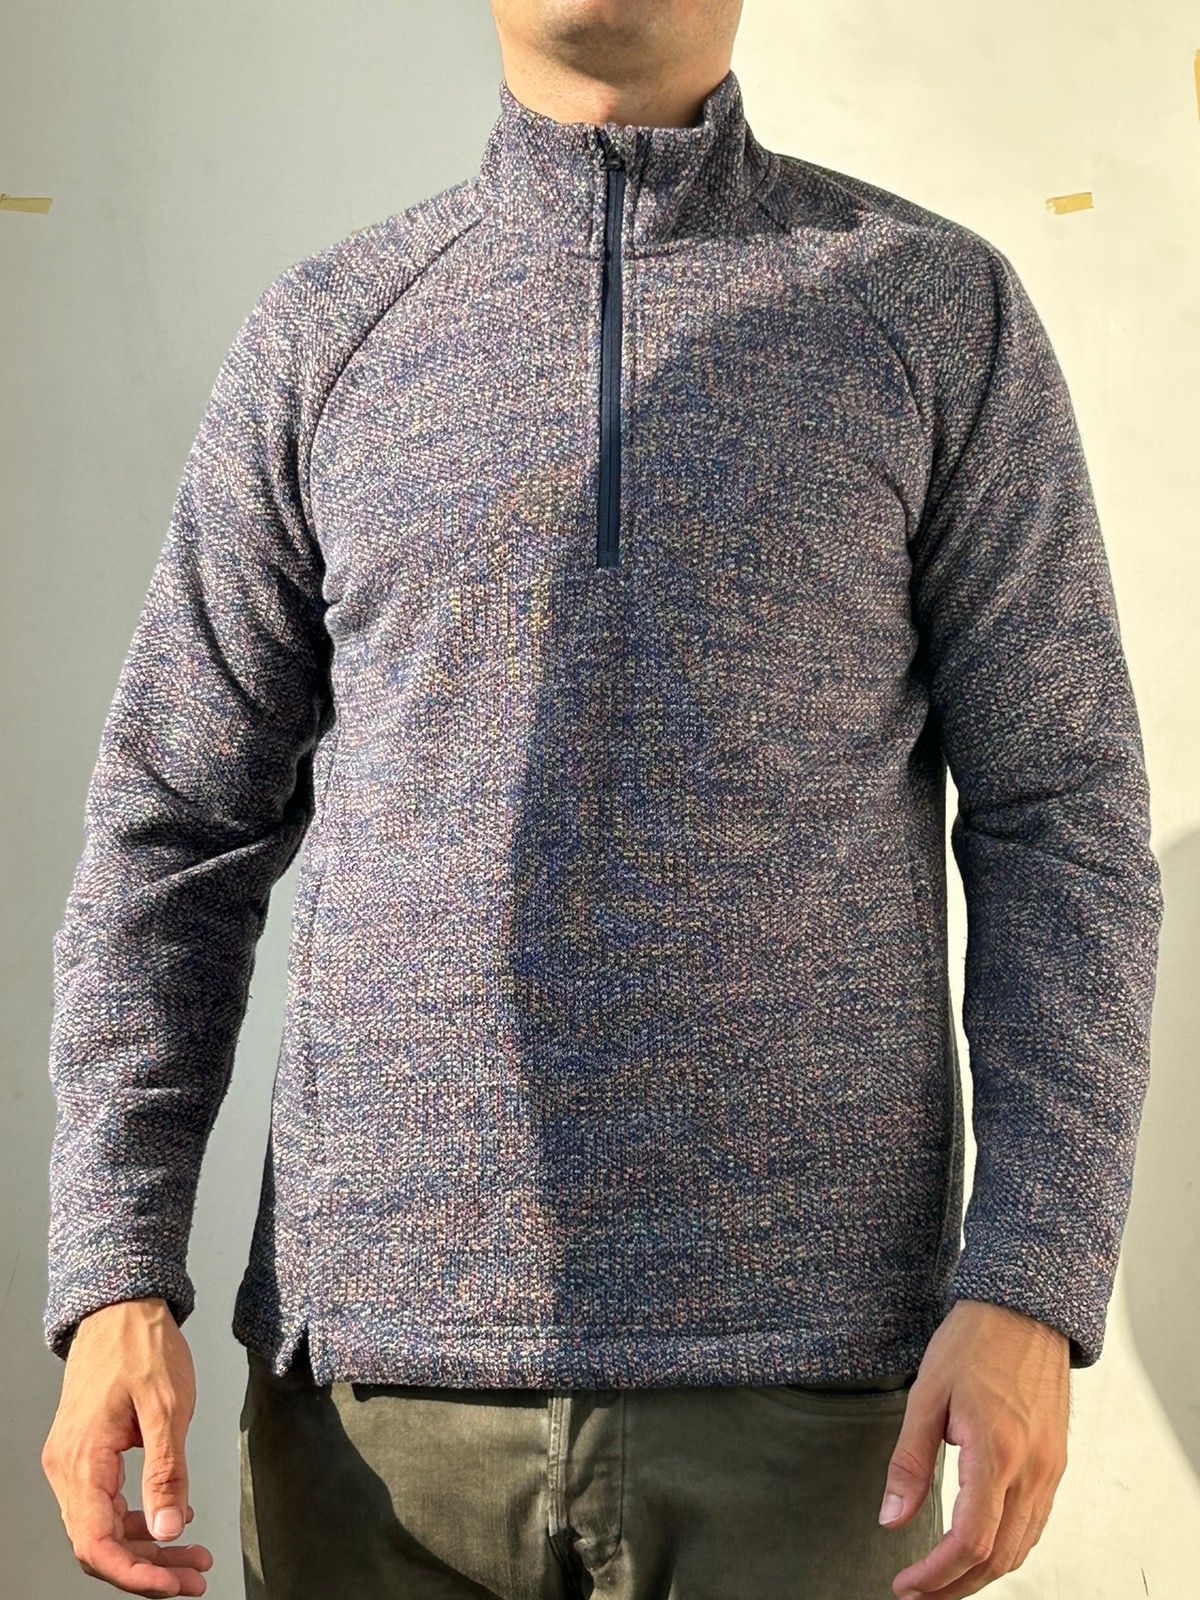 Outdoor Life Outdoor sweater Size US L / EU 52-54 / 3 - 1 Preview